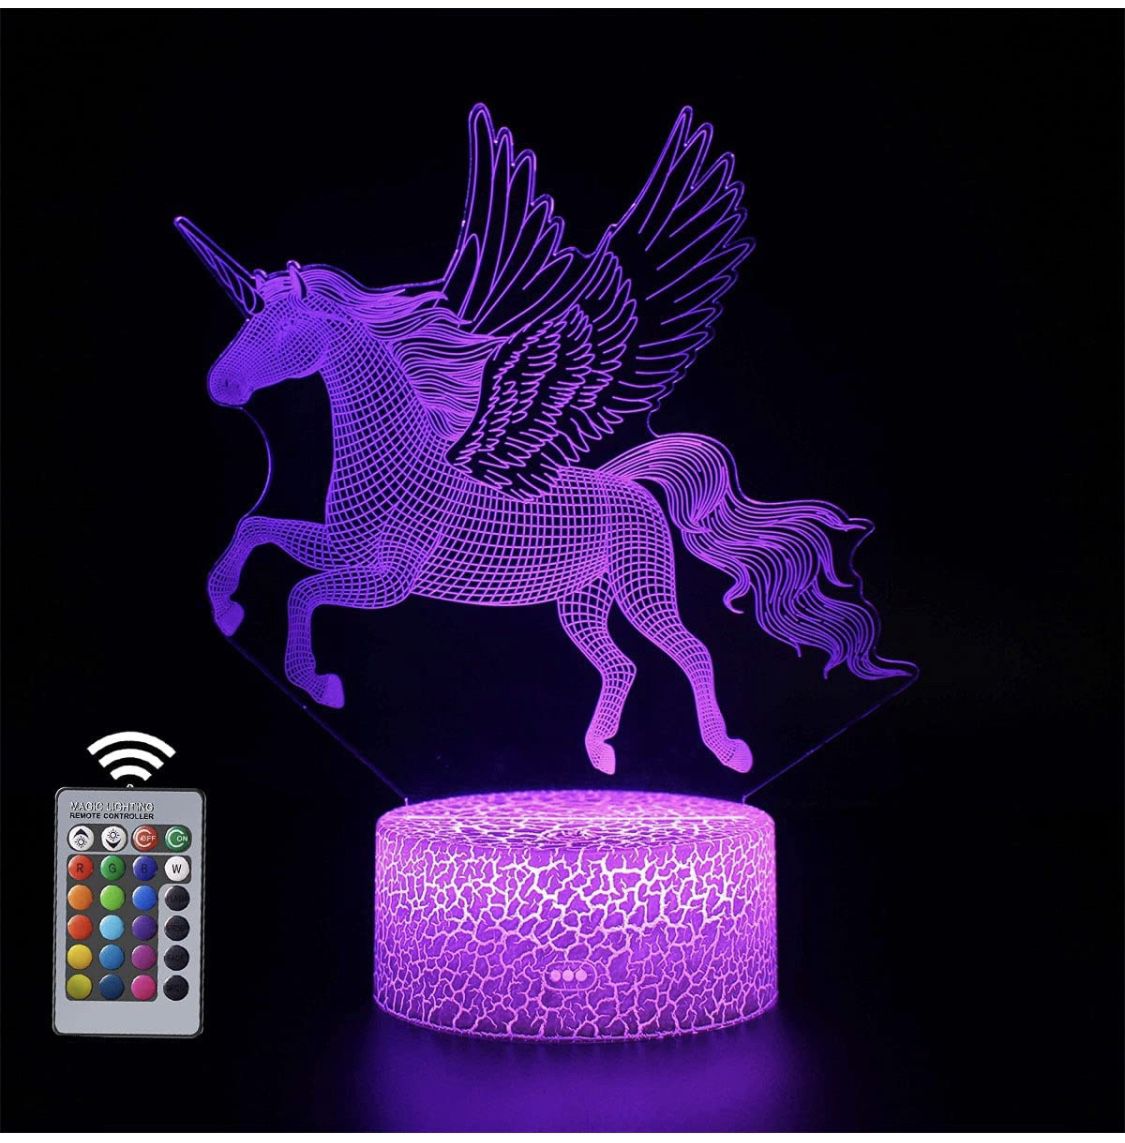 3D Unicorn Night Light, 3D Illusion Lamp 16 Colors Changeable with Remote Control 3D Visual Lights for Home Decoration Bedside Birthday Gifts Desk Lam